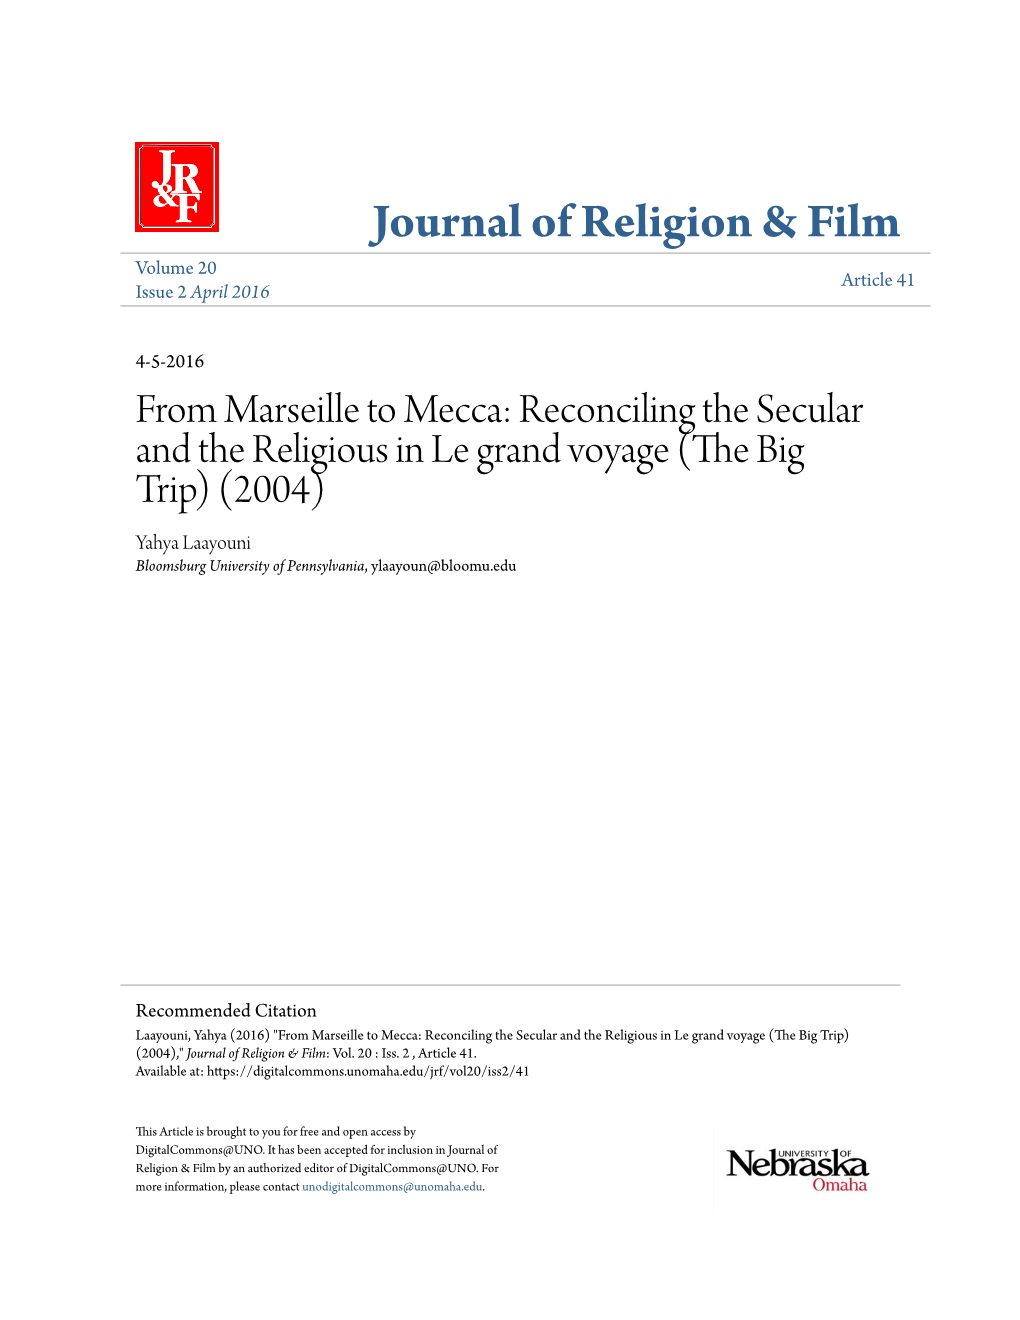 Reconciling the Secular and the Religious in Le Grand Voyage (The Ib G Trip) (2004) Yahya Laayouni Bloomsburg University of Pennsylvania, Ylaayoun@Bloomu.Edu